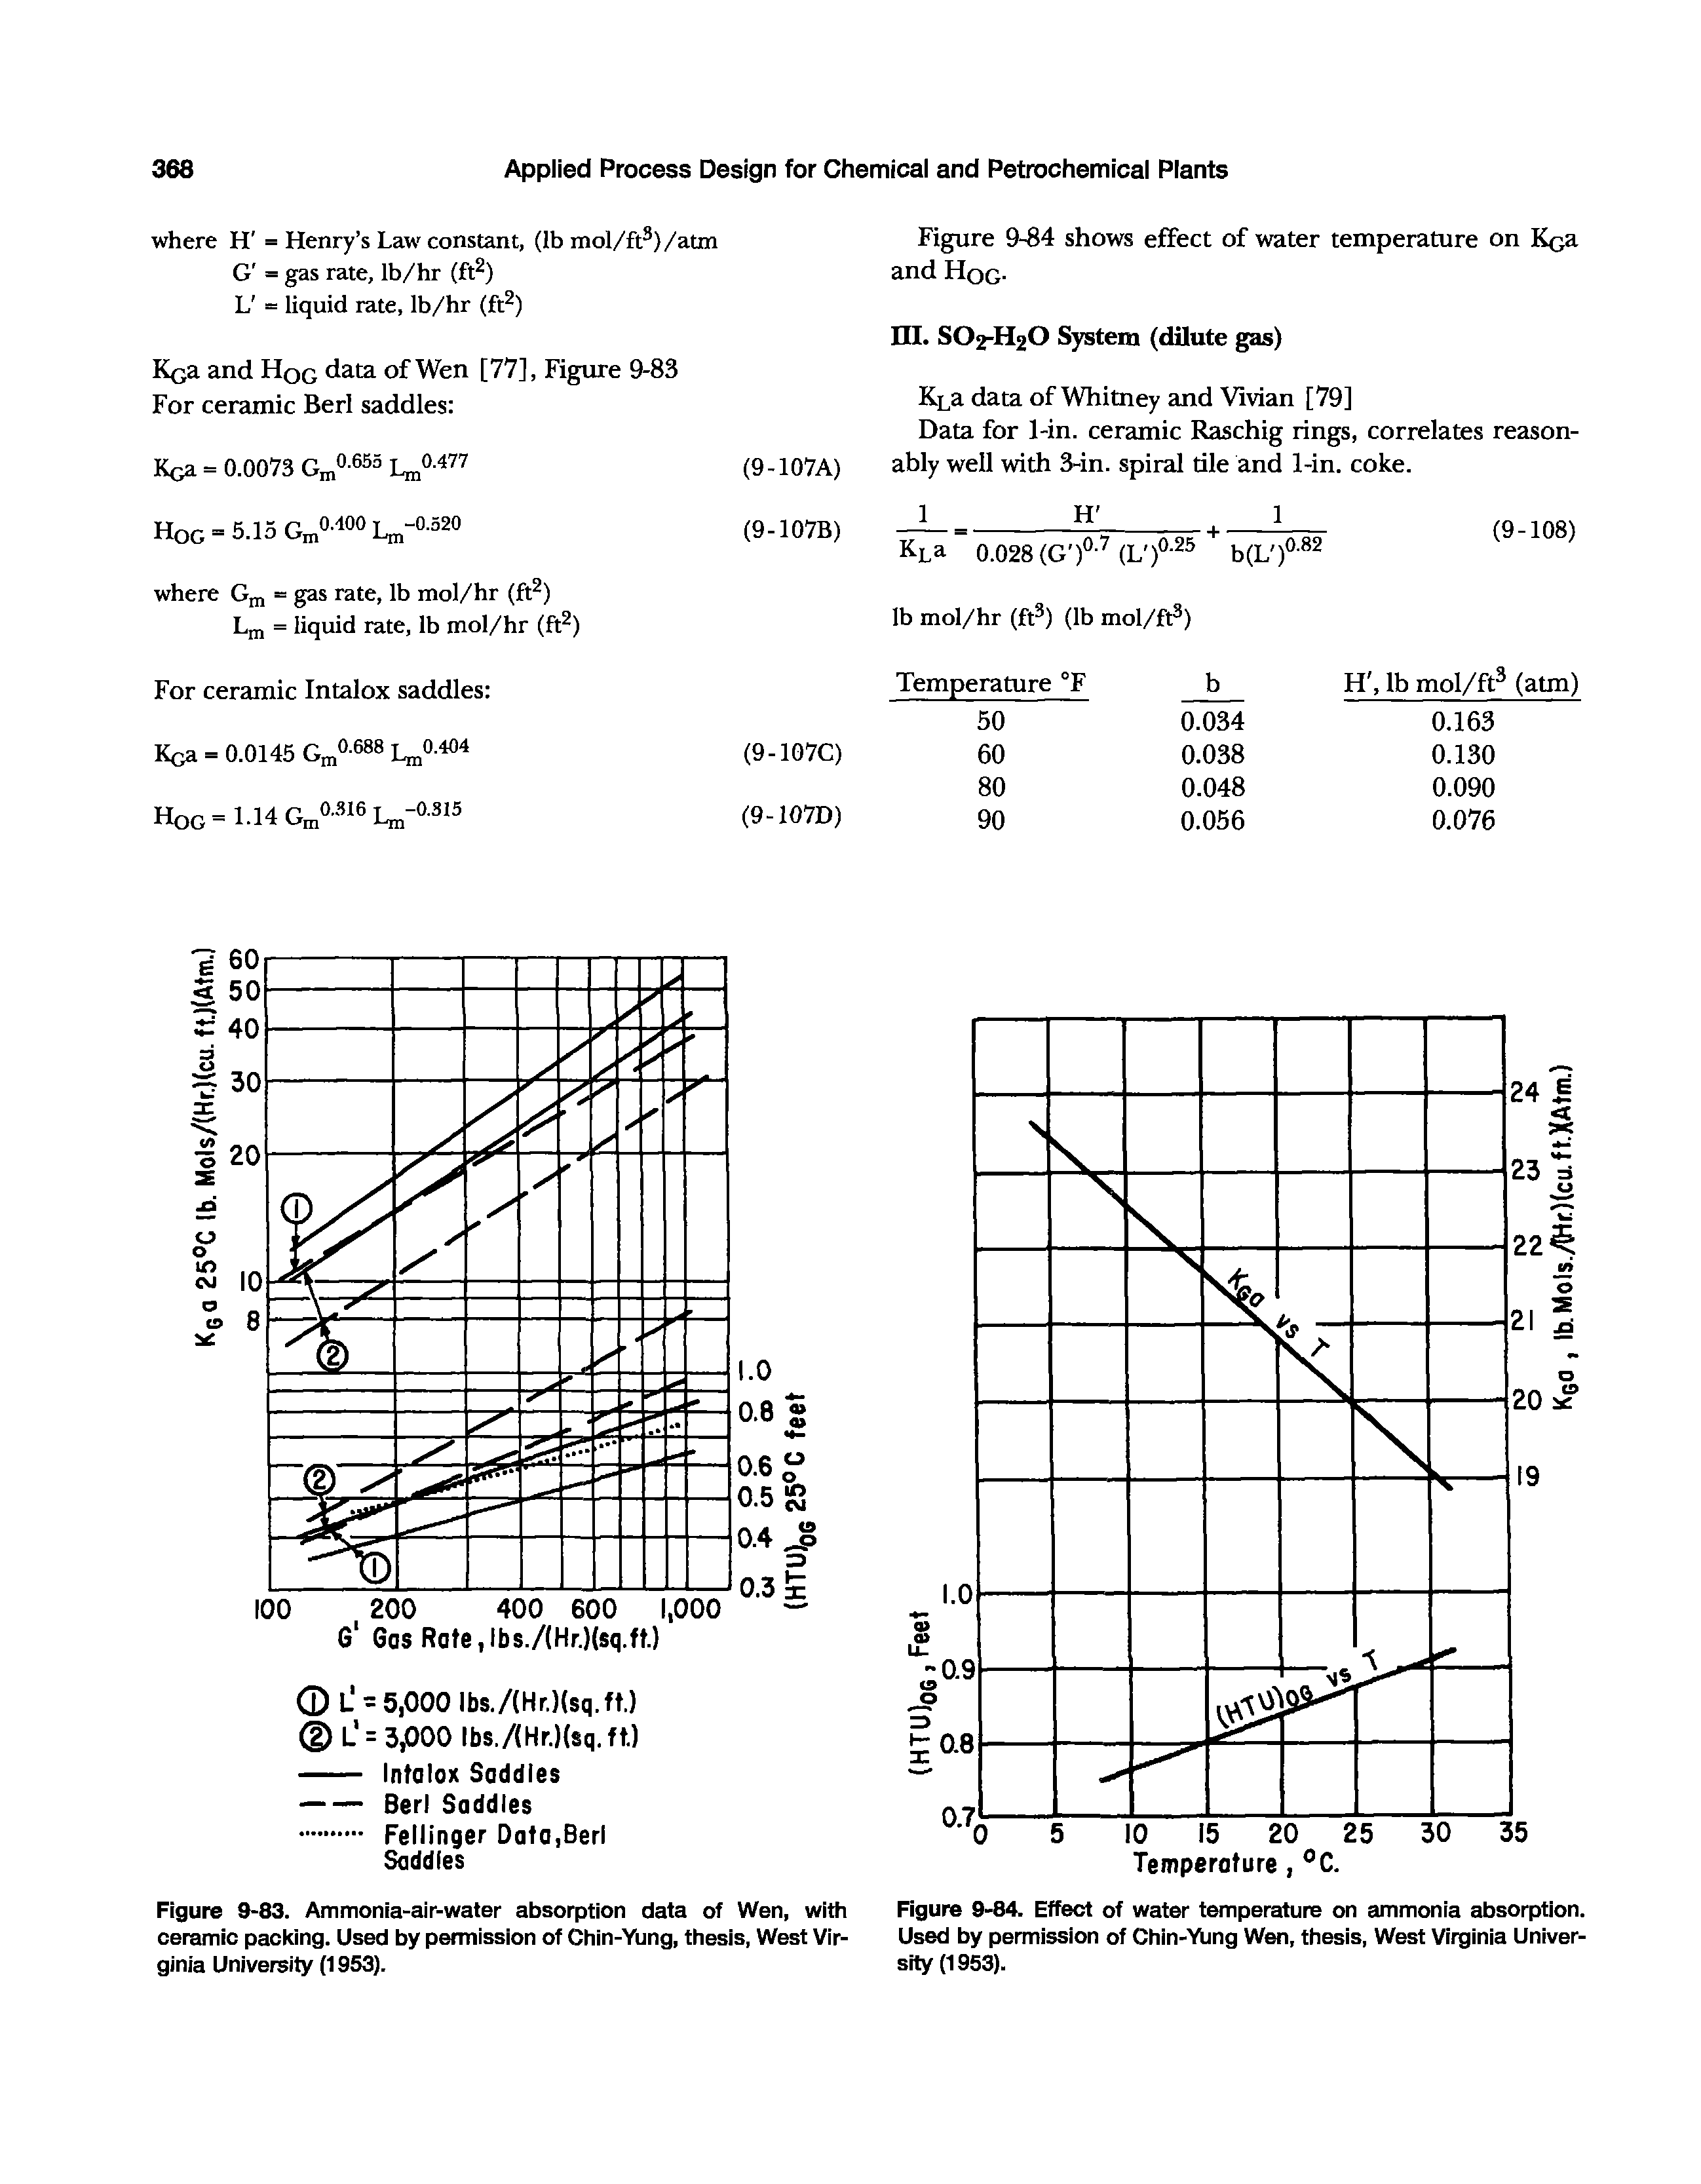 Figure 9-84. Effect of water temperature on ammonia absorption. Used by permission of Chin-Yling Wen, thesis. West Virginia University (1953).